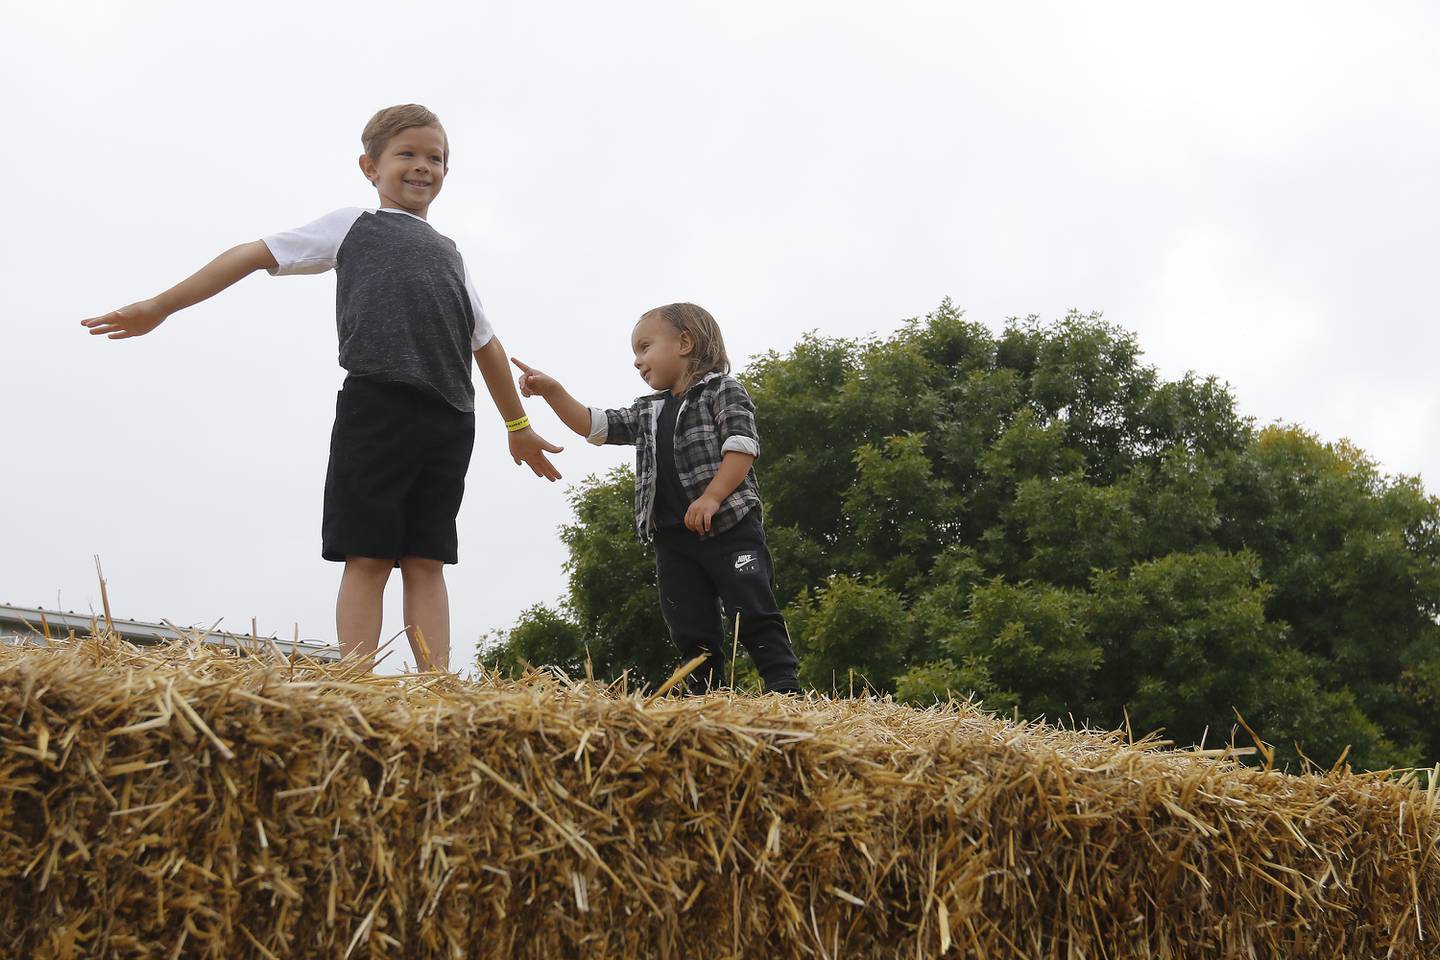 Caden Laxner, 6, and friend Henry Olszewski, 2, both of Huntley, enjoy their time atop a hay pile during the Fall on the Farm event at Tom's Market on Saturday, Oct. 2, 2021 in Huntley.  The month-long event began on Friday and will conclude Oct. 31.